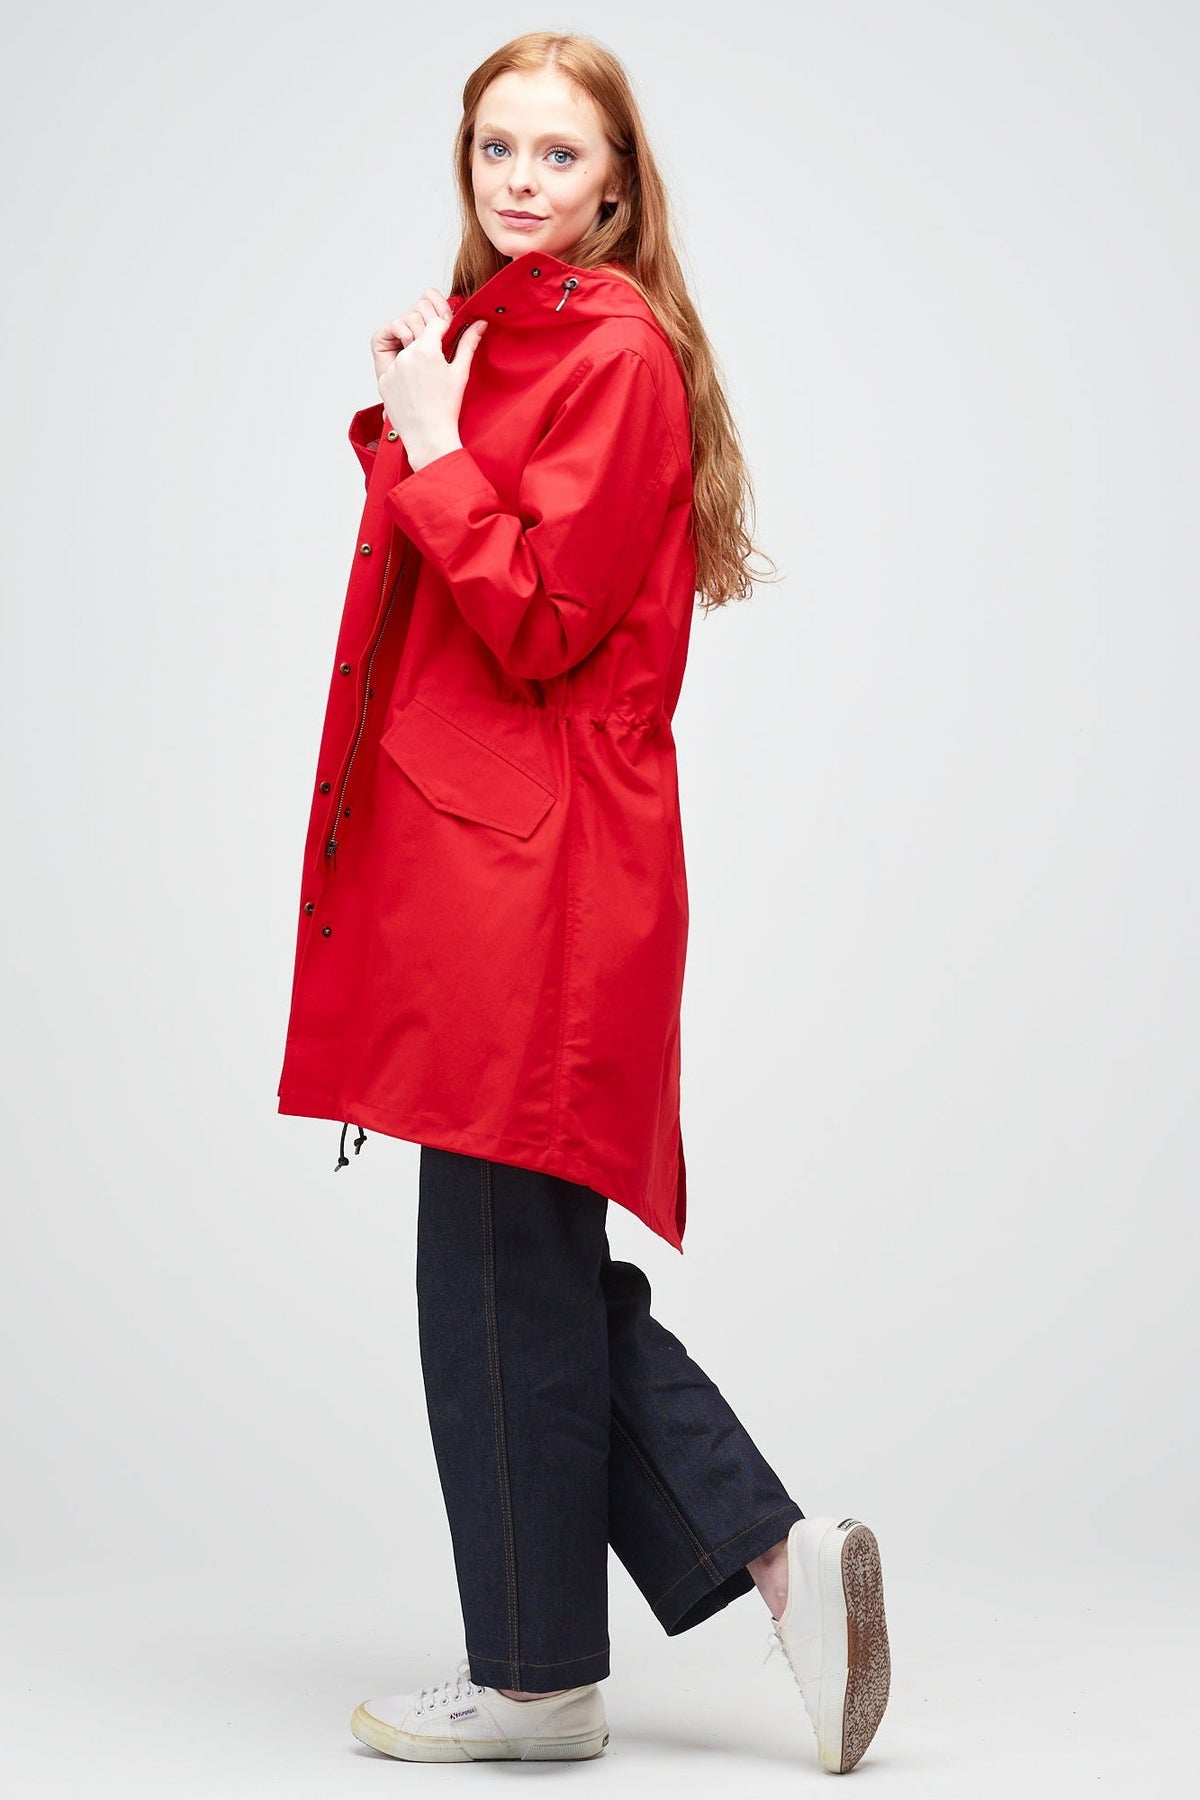 
            Side shot of A young, white female model with ginger hair wearing long red parka unzipped. The parka is styled with indigo jeans and a white trainer.